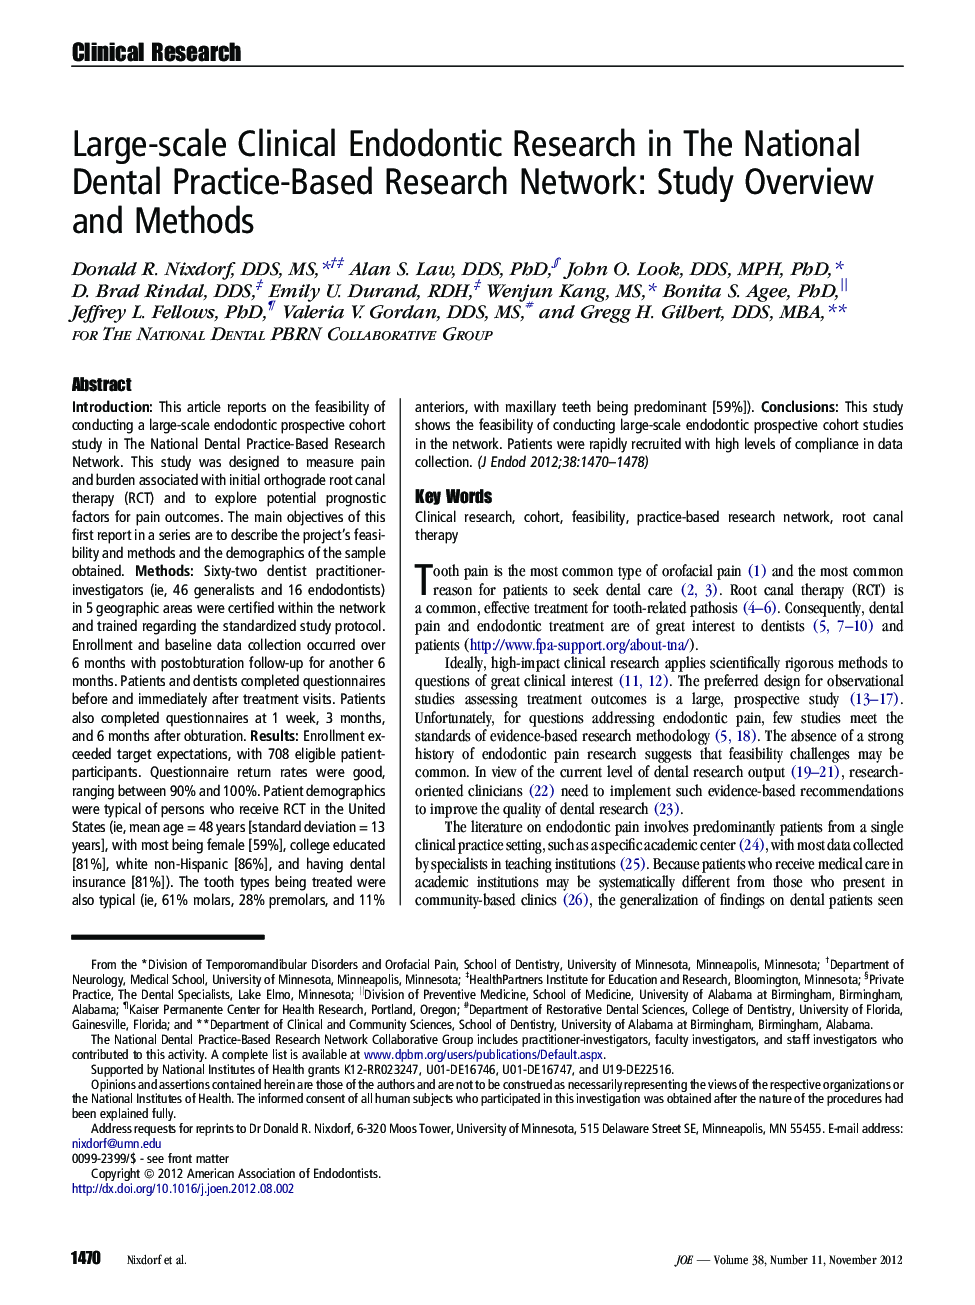 Large-scale Clinical Endodontic Research in The National Dental Practice-Based Research Network: Study Overview and Methods 